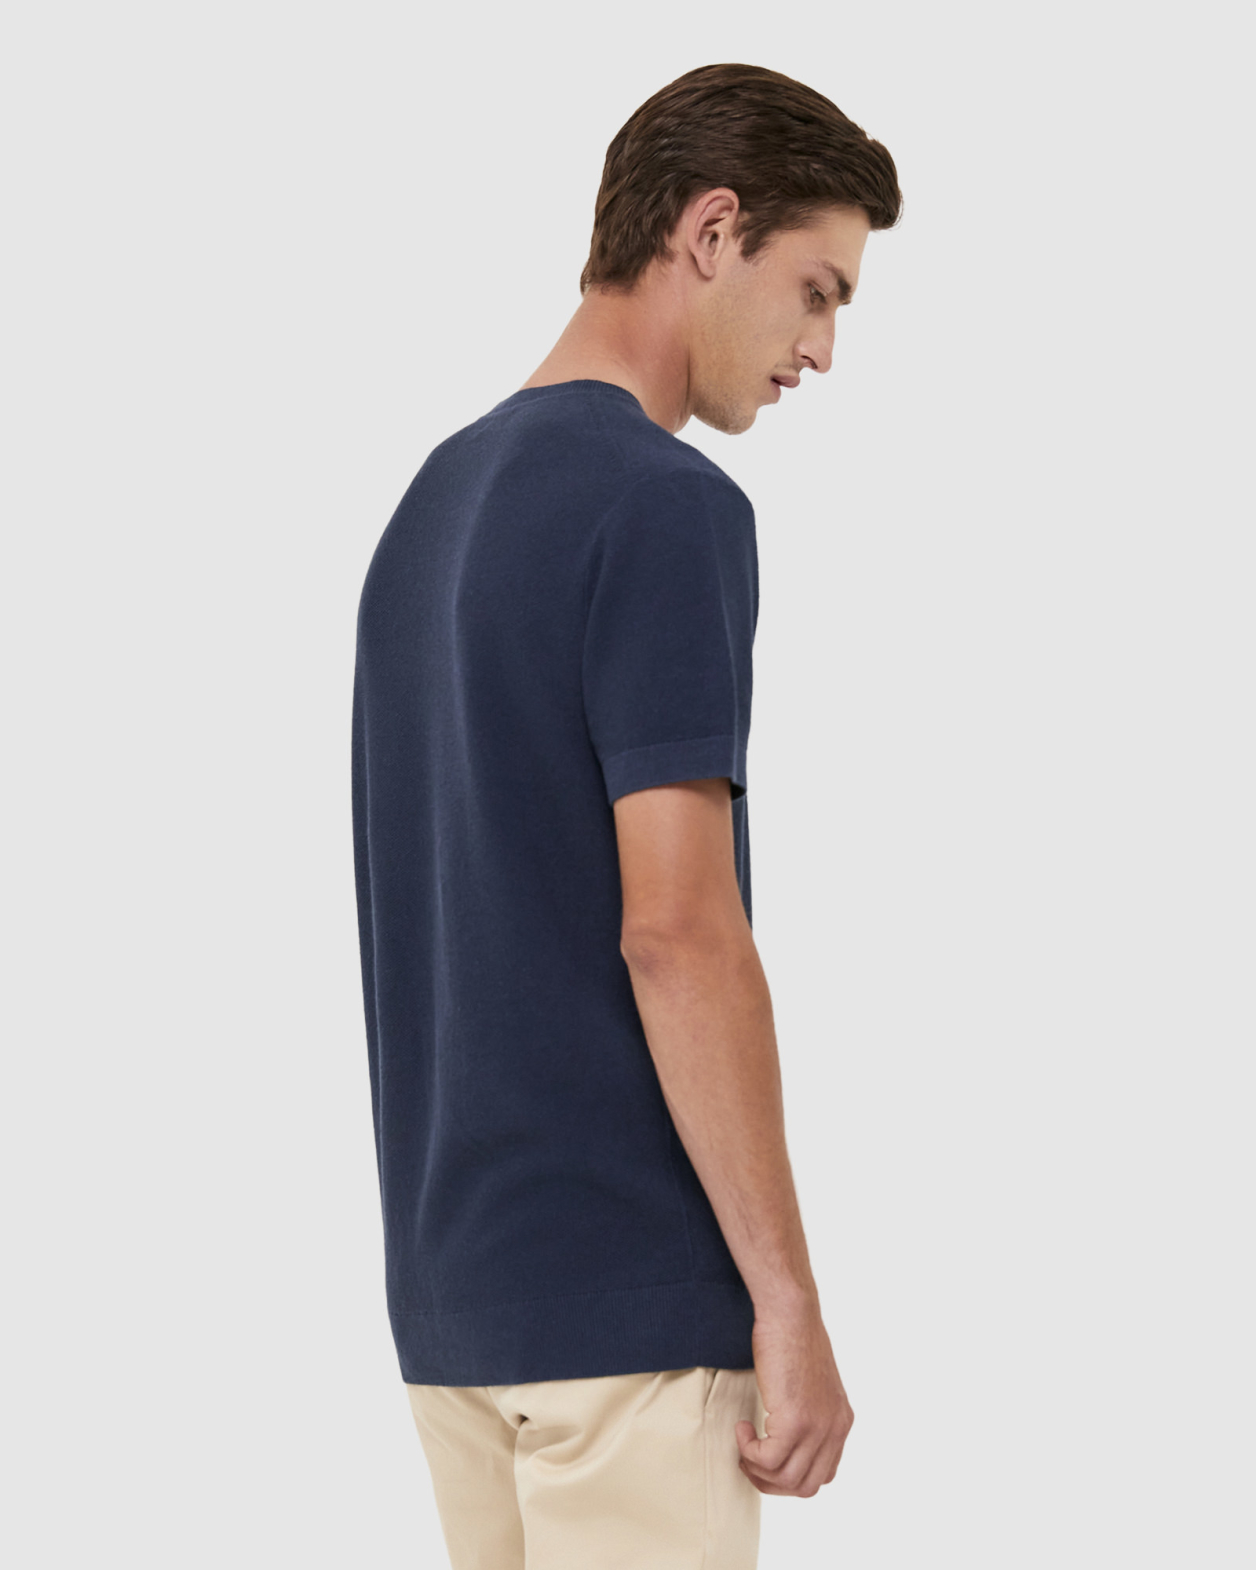 Miro Linen Cotton Knitted Tee in INK